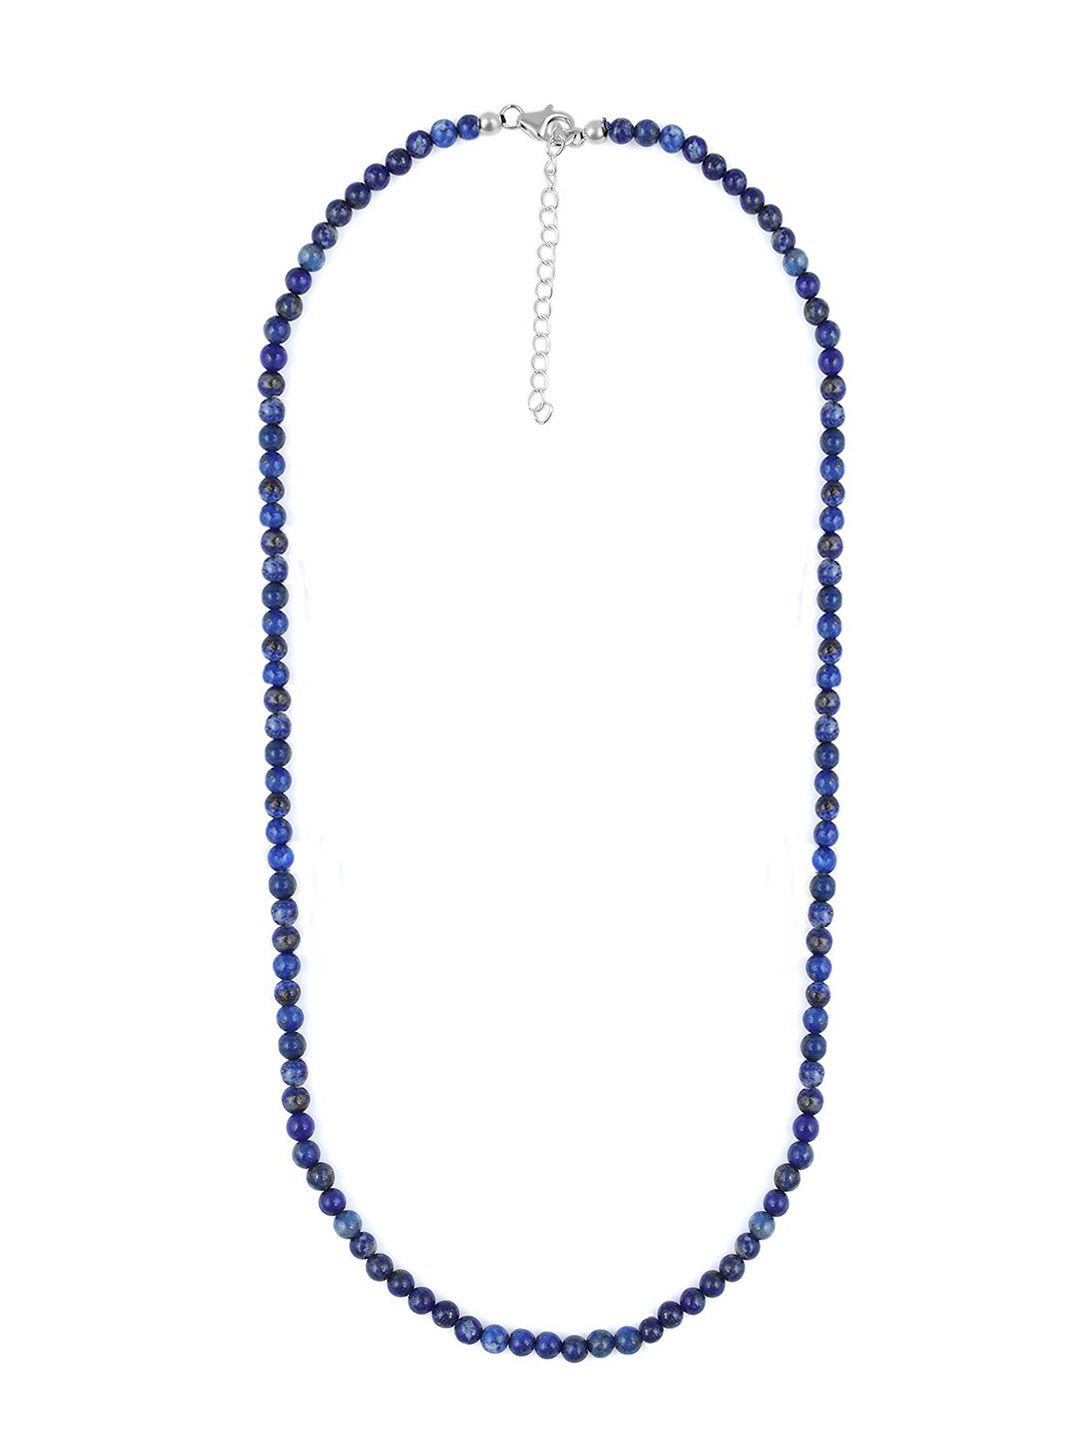 LA SOULA Blue & Silver-Toned Sterling Silver Handcrafted Necklace Price in India